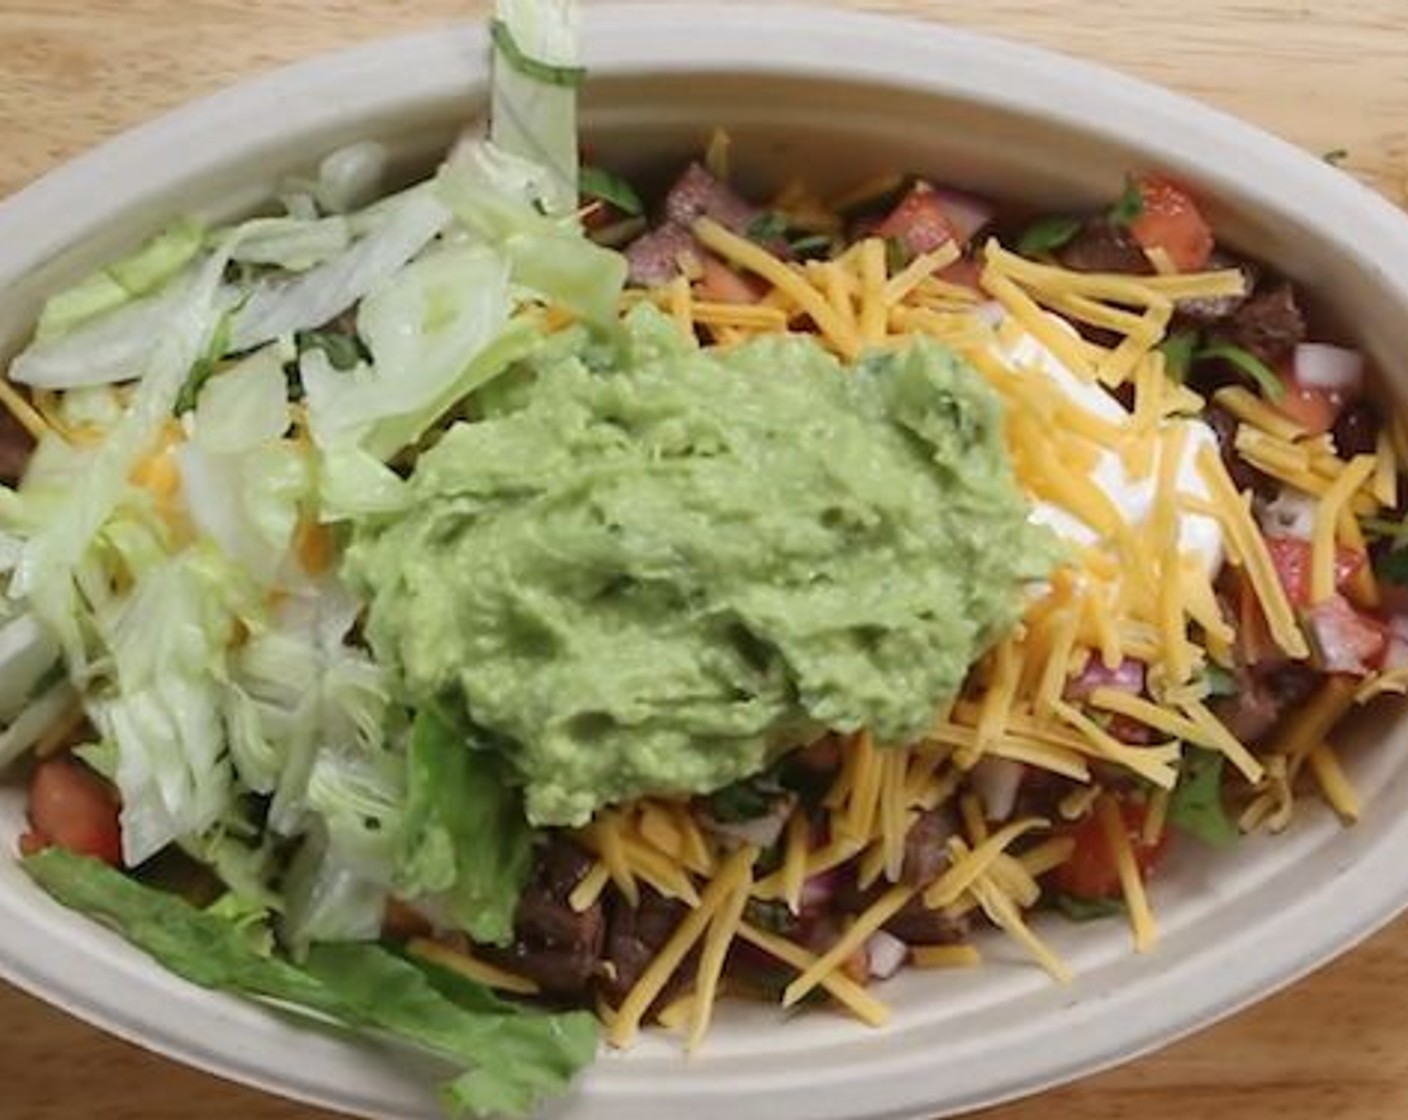 step 6 To assemble the steak bowl add 1/2 cup of the cilantro rice, Canned Black Beans (1/2 cup), Beef Steak Chunks, Salsa, Sour Cream (1 Tbsp), Cheddar Cheese (1/4 cup), 1/2 cup of the guacamole and finish with Shredded Iceberg Lettuce (1/2 cup). Serve and enjoy!